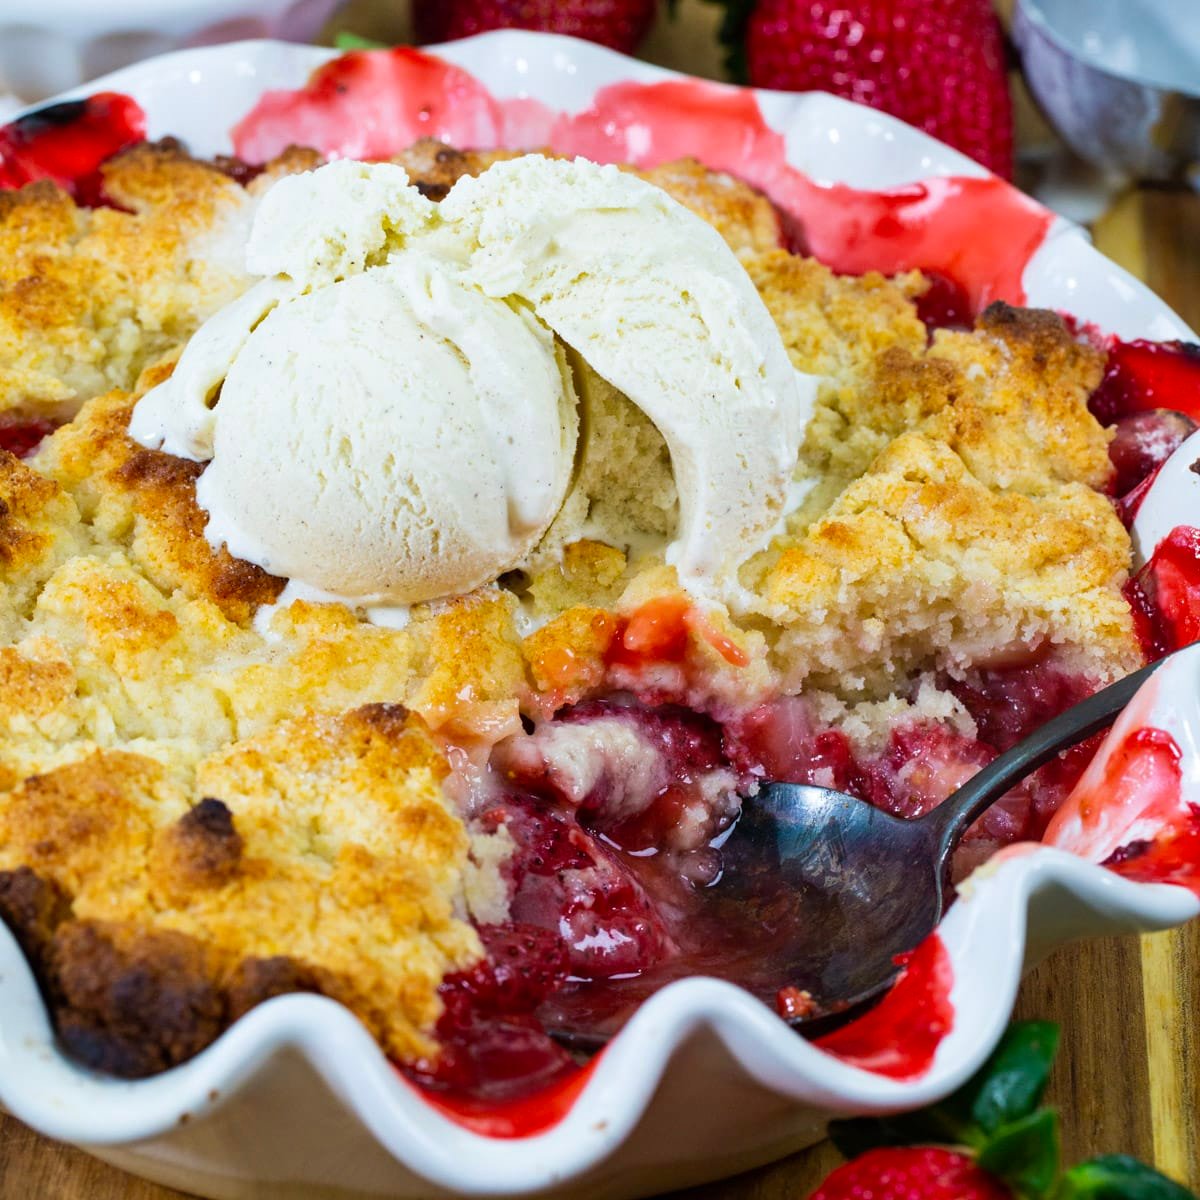 Strawberry Cobbler with a serving spoon scooping into it.